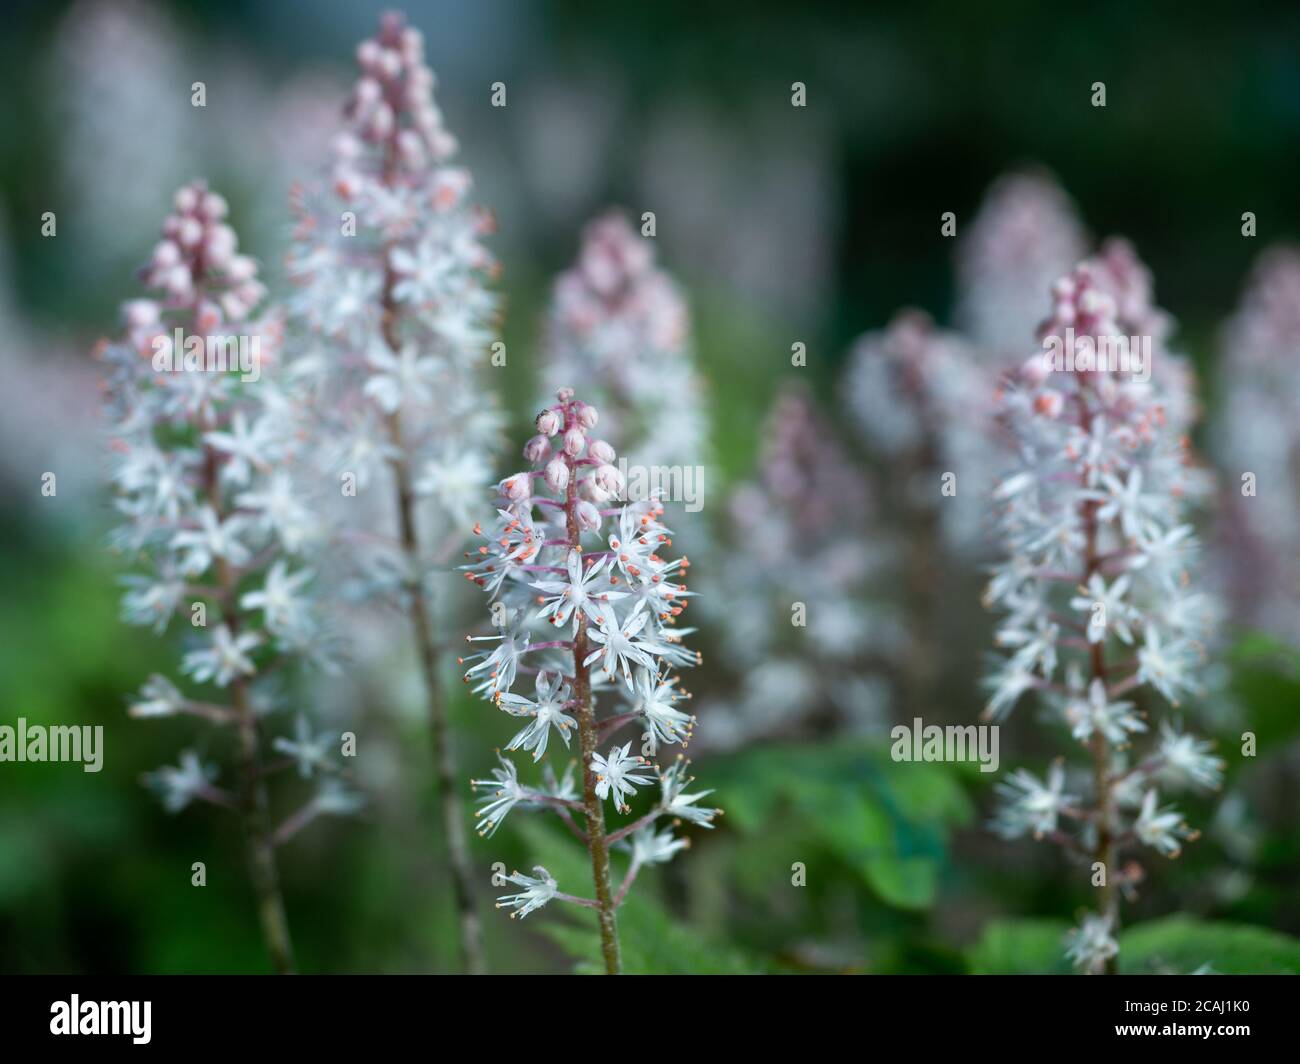 Blooming heartleaf foamflower or false miterwort in spring. Close-up of flowering Tiarella cordifolia. Selective focus with blurred background. Shallo Stock Photo